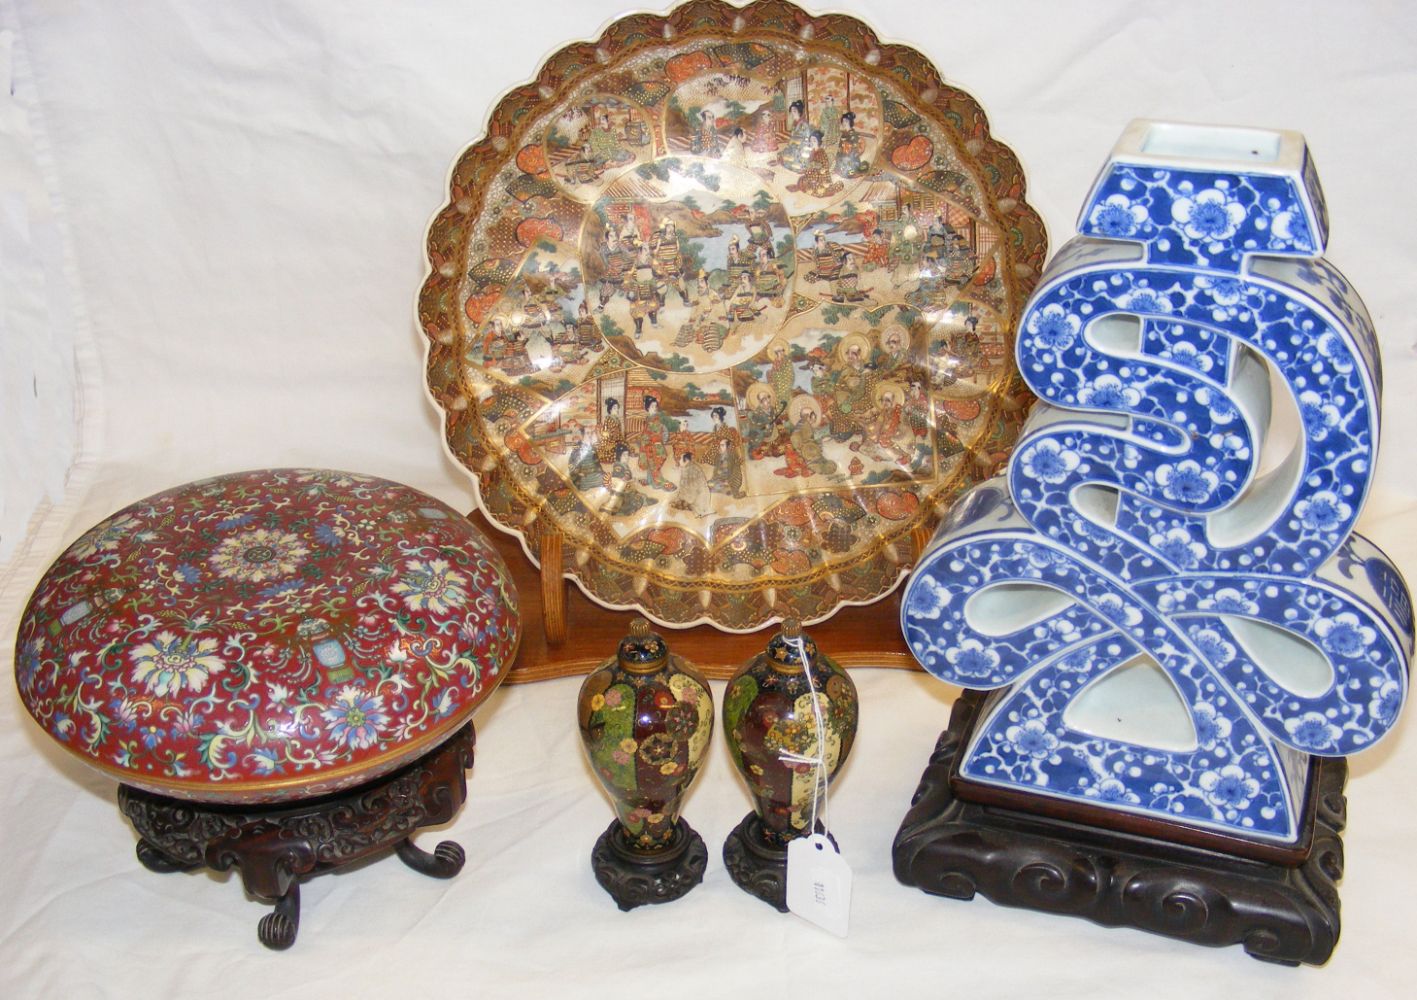 Antique, Collectables and Vintage